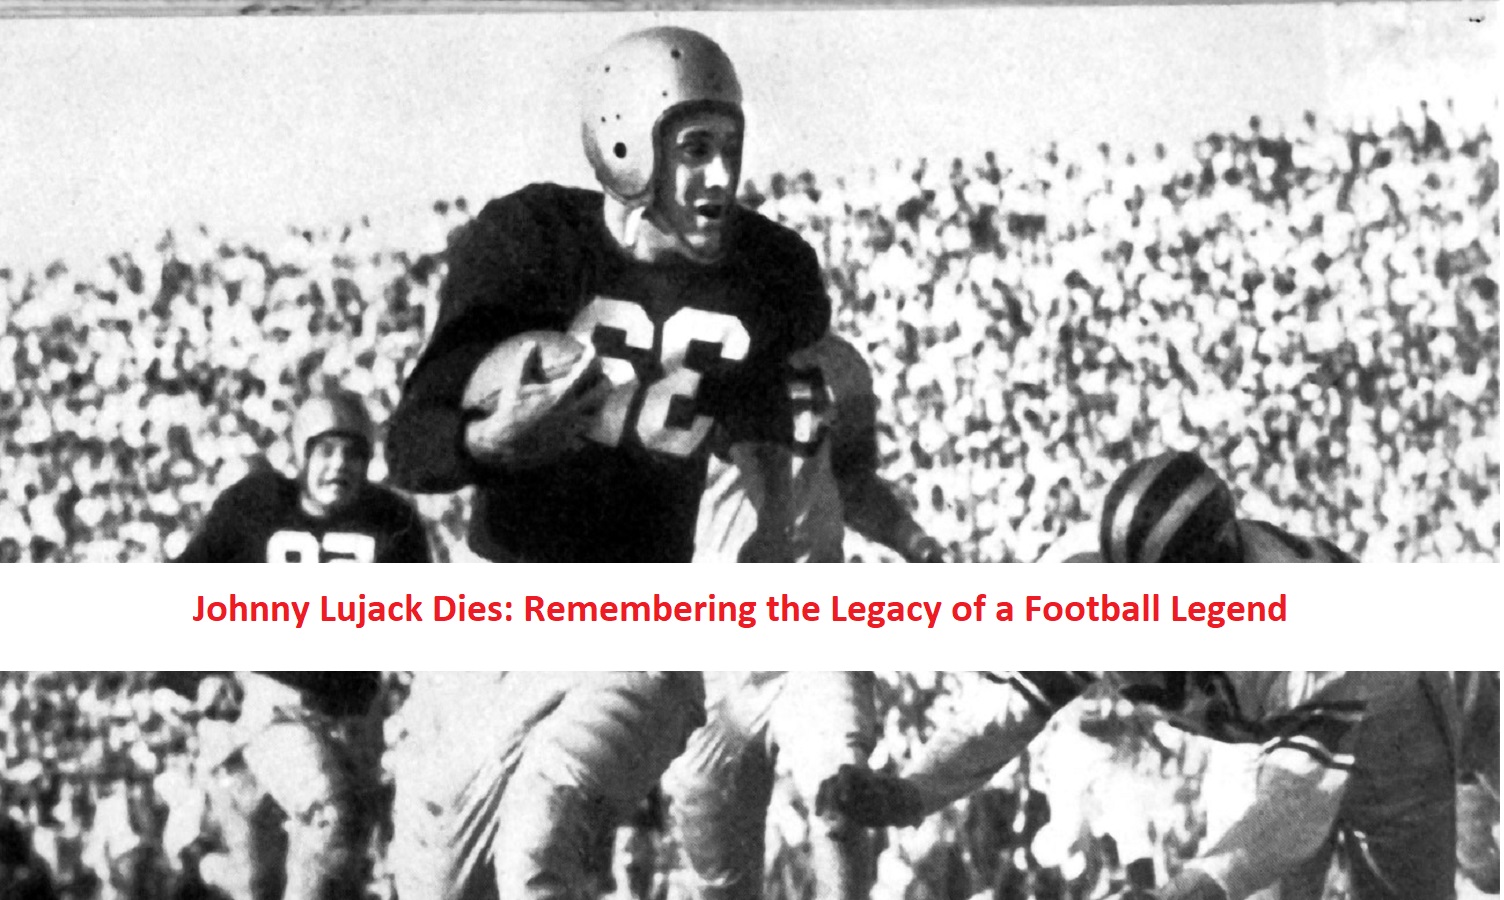 Johnny Lujack Dies: Remembering the Legacy of a Football Legend